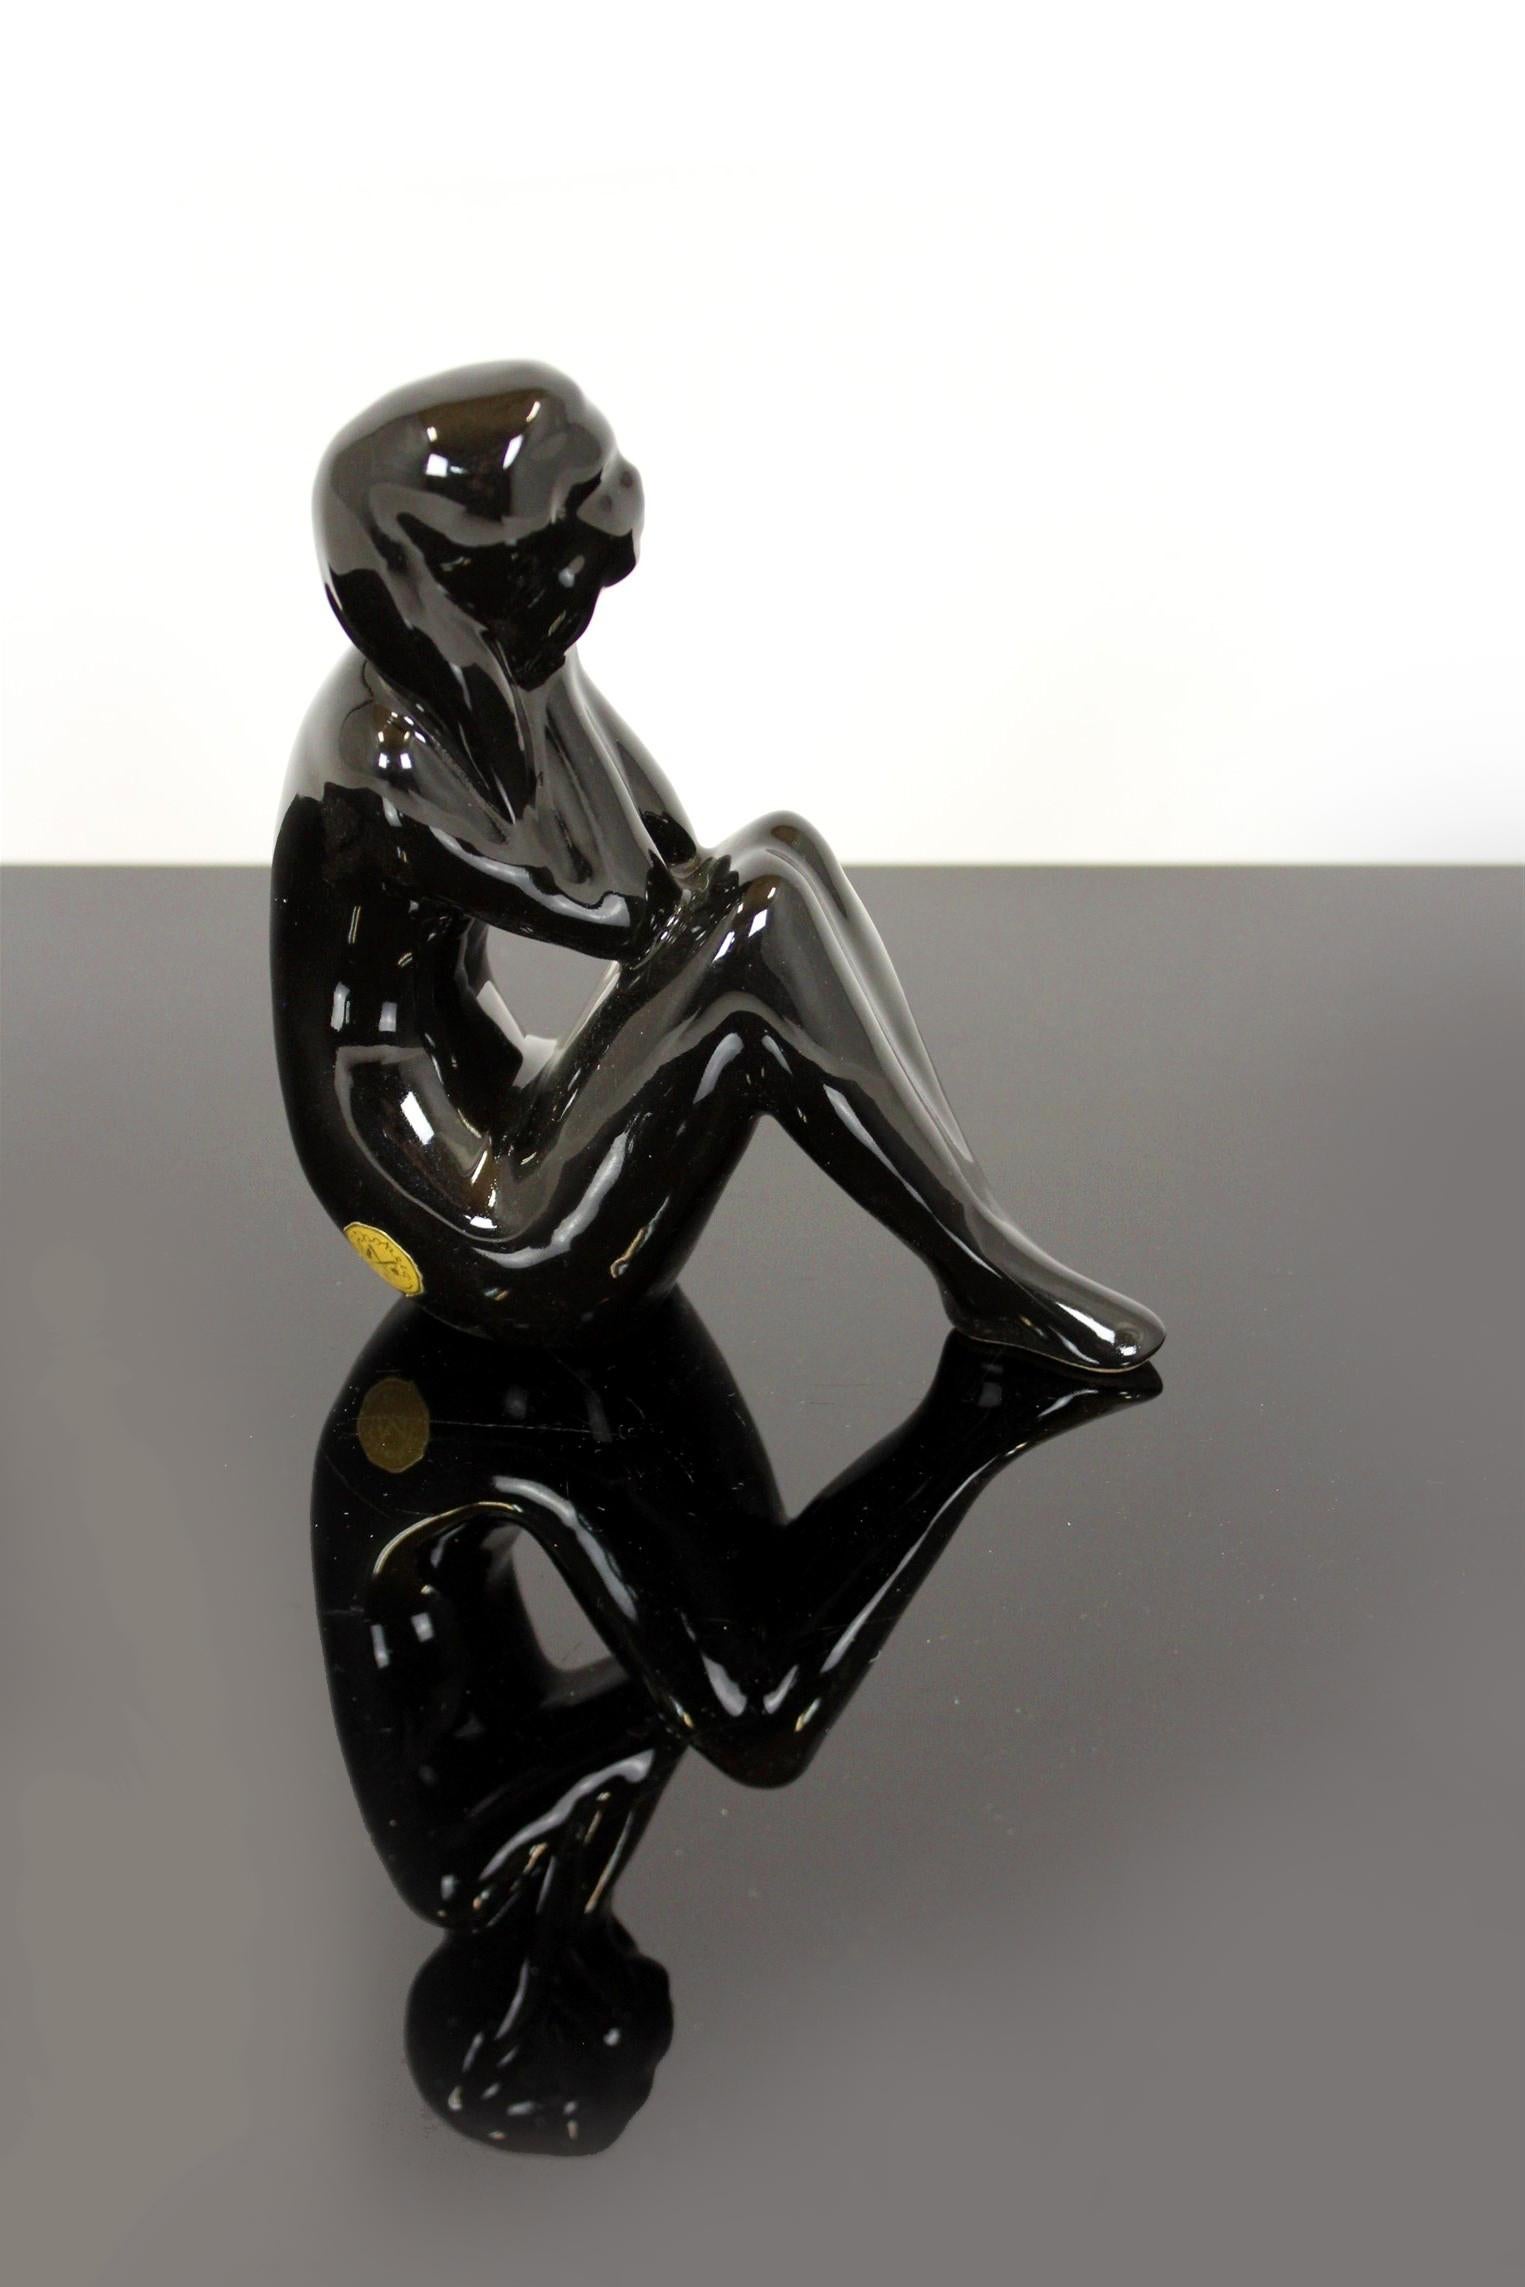 
This figurine of a woman was made by Jihokera Bechyne in the 1960s in Czechoslovakia. The figurine is in very good condition.